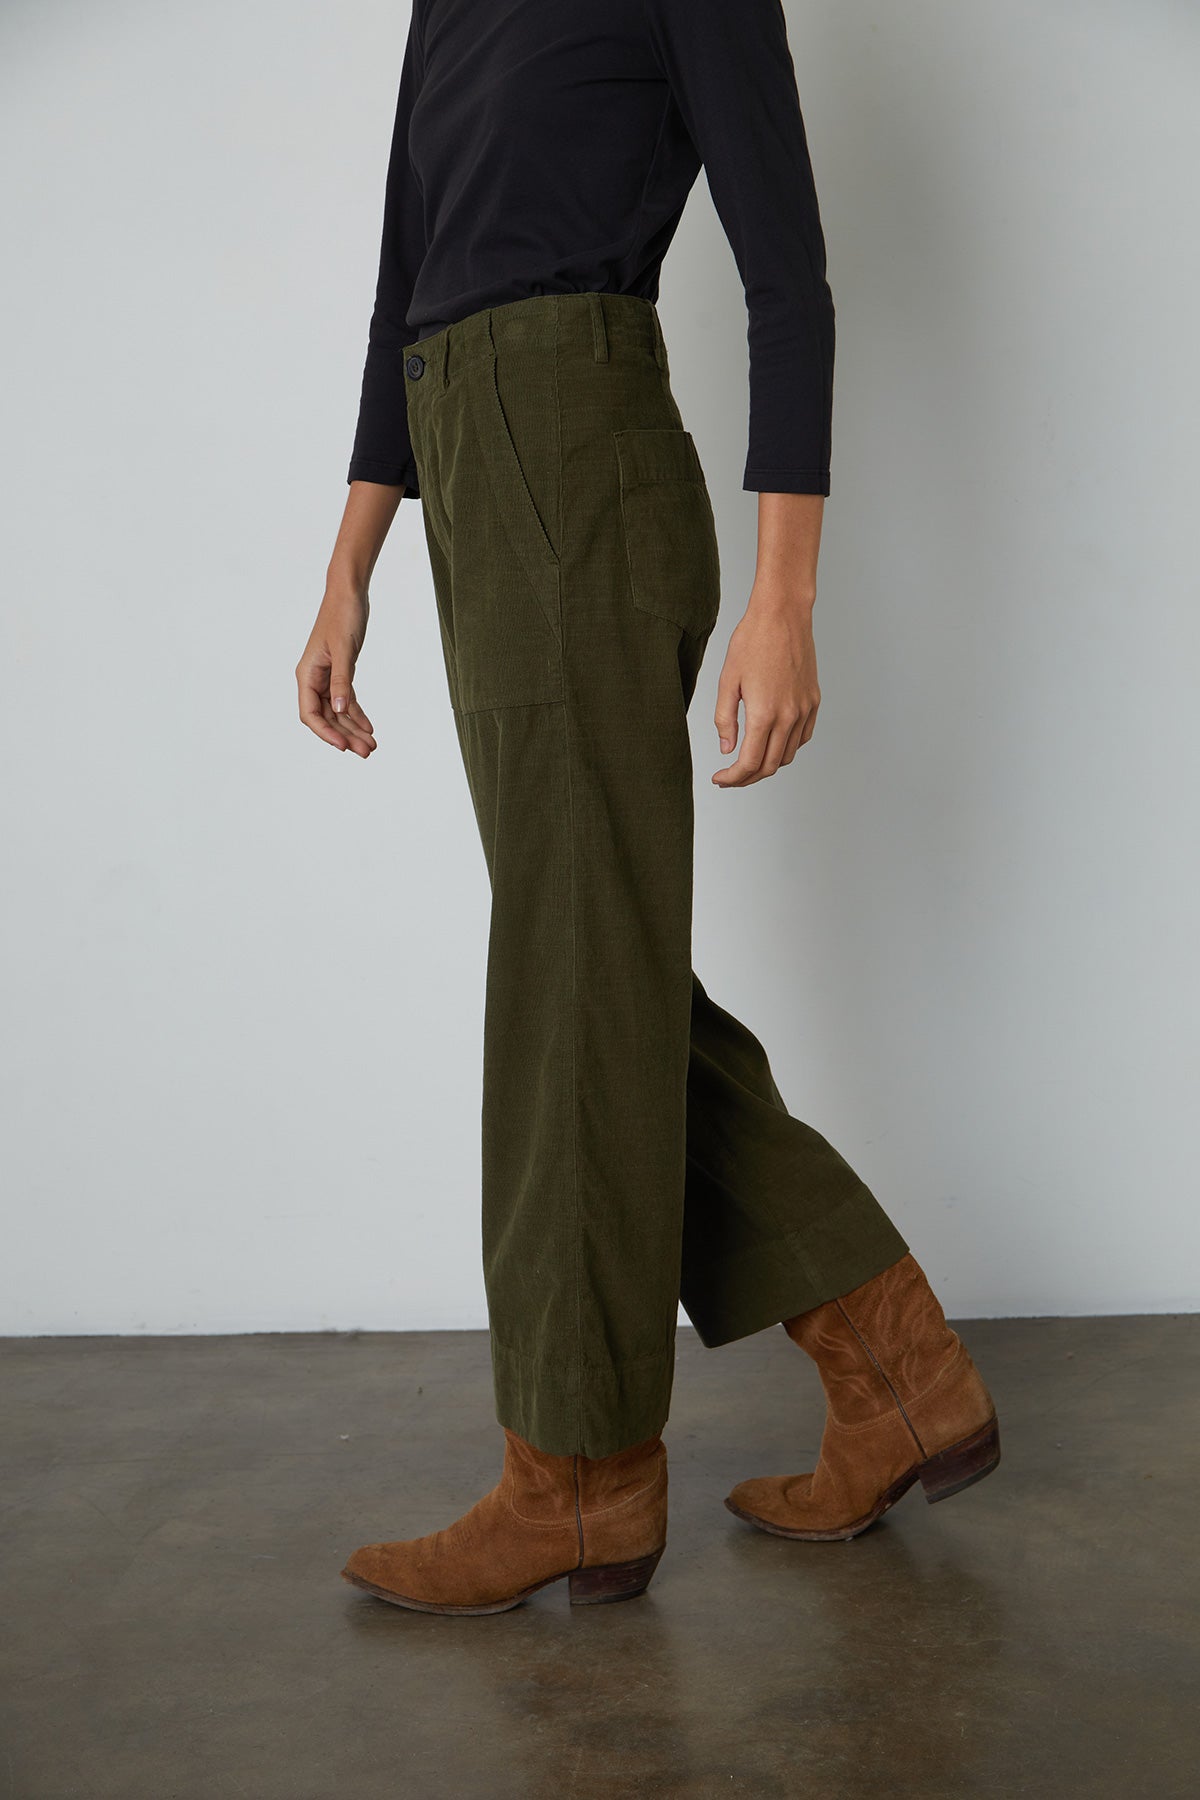   Vera Corduroy Wide Leg Pant in Aloe side pocket standing with boots 